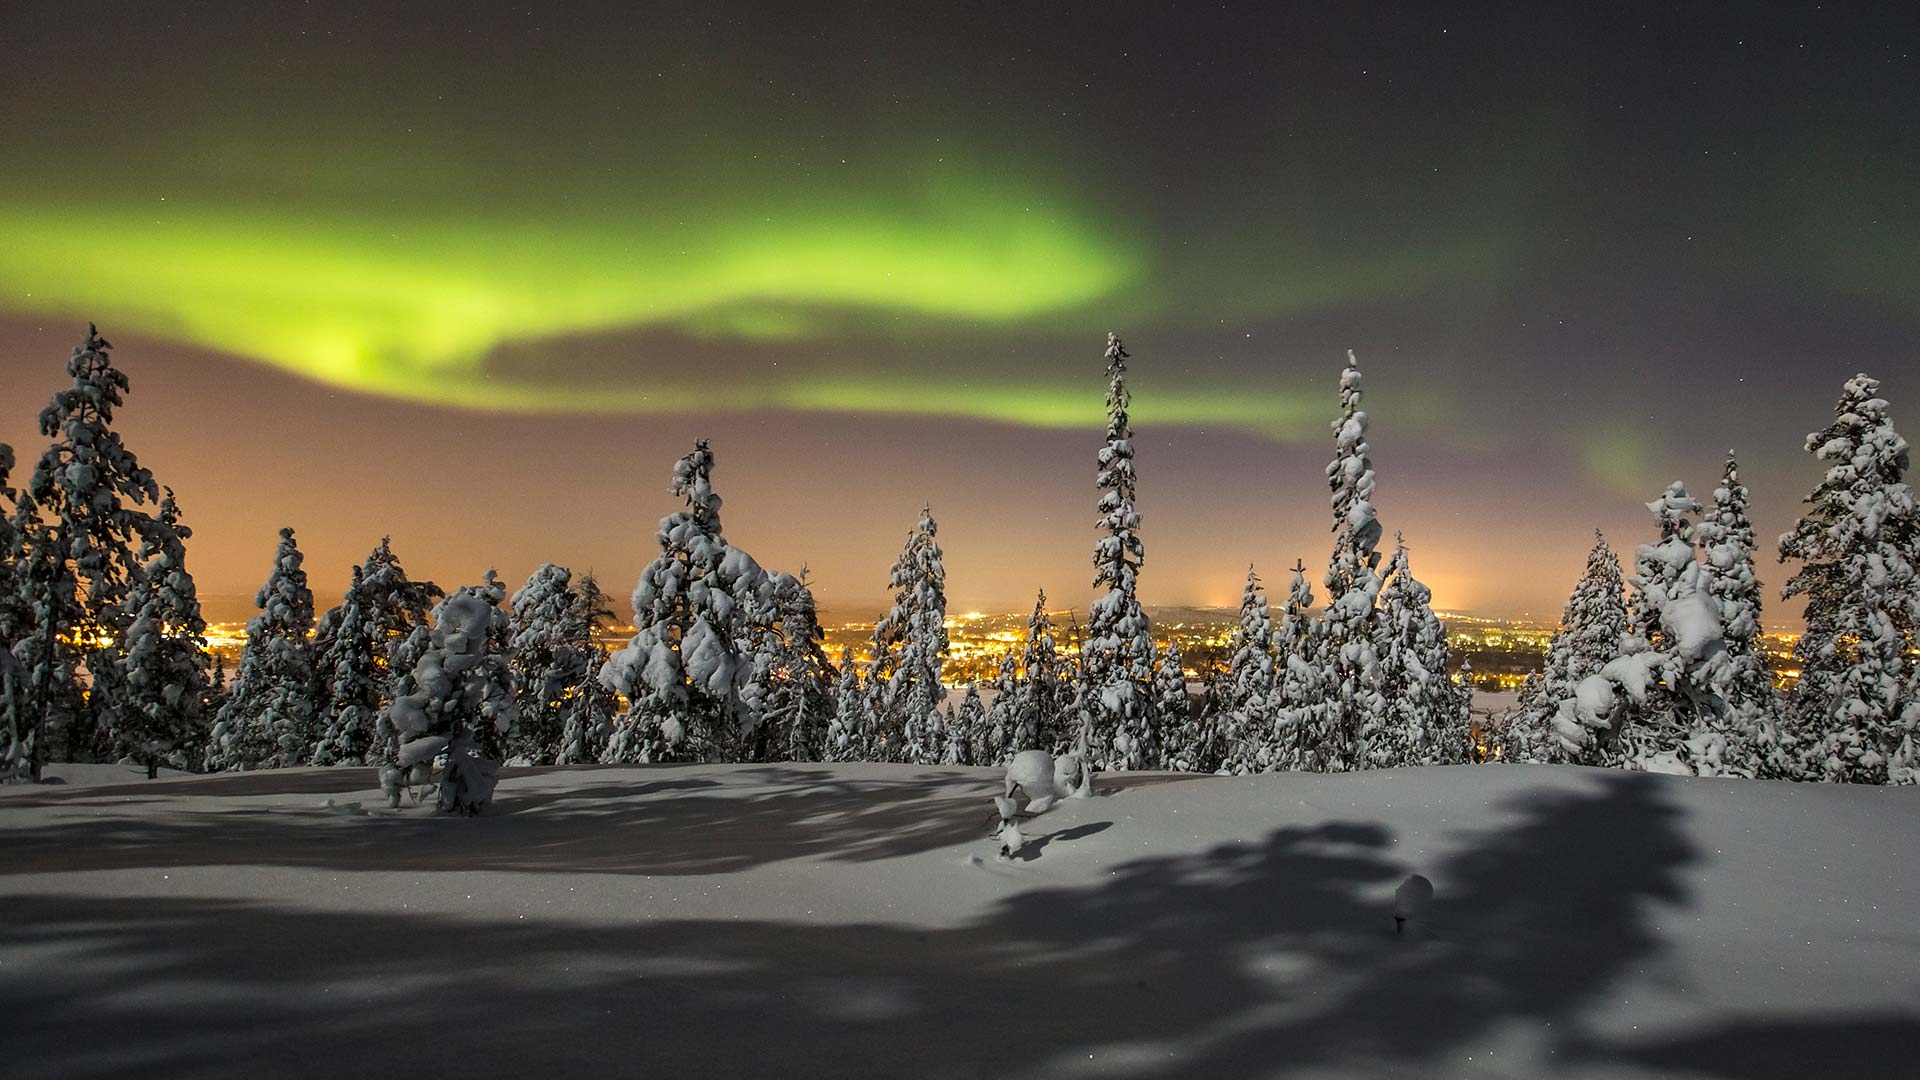 Best Time and Place to See the Northern Lights in Finland